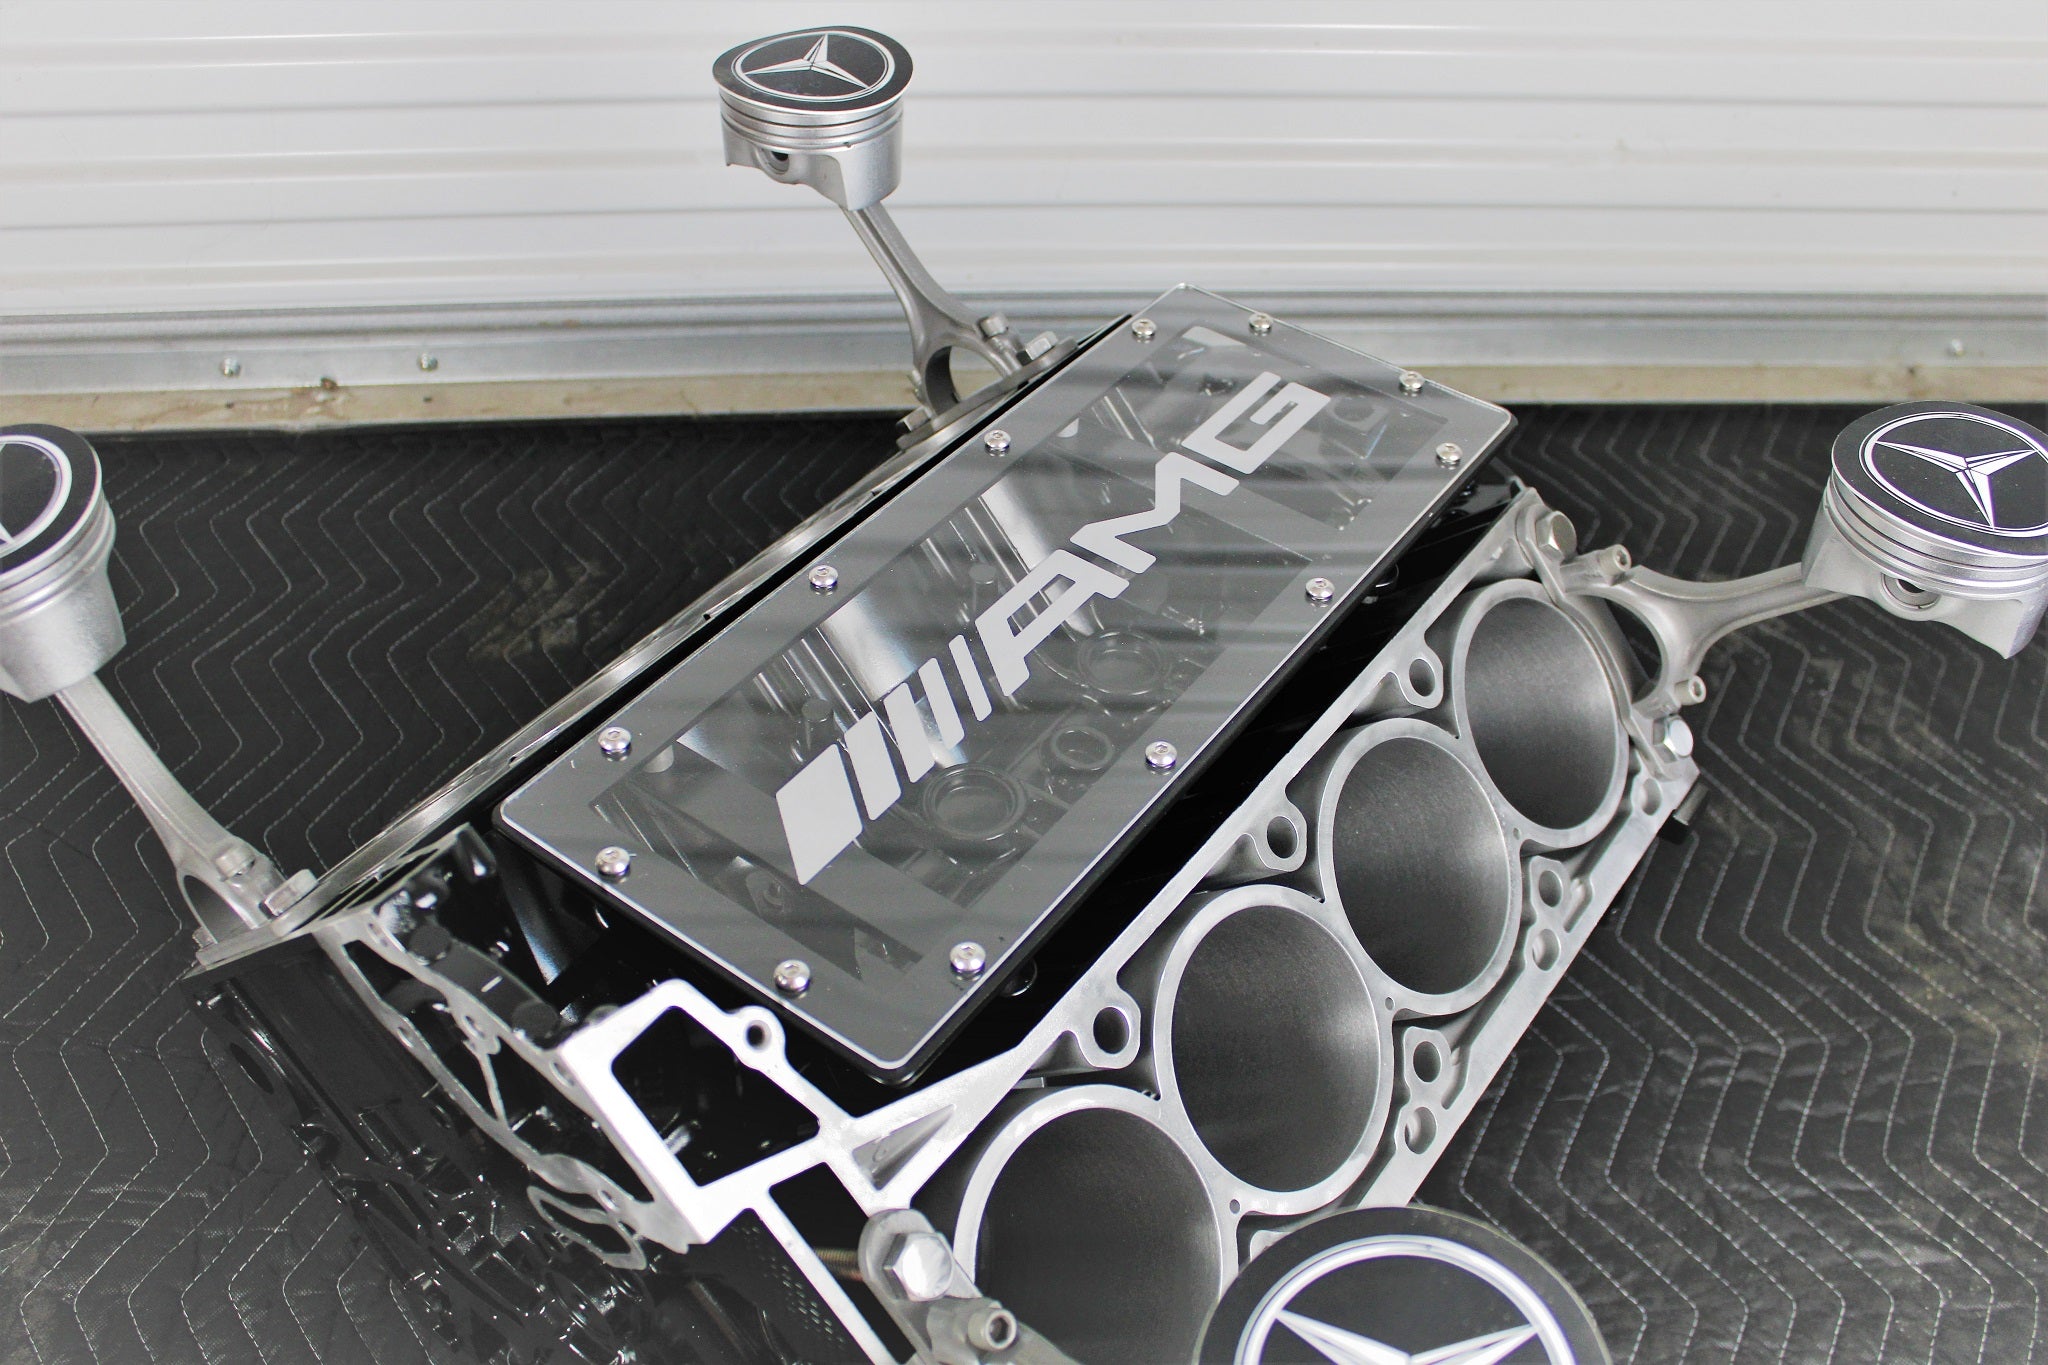 Engine block coffee table finished in black and silver, with the mercedes logo on each supporting piston. The AMG logo is displayed in the middle of the table without its glass top.